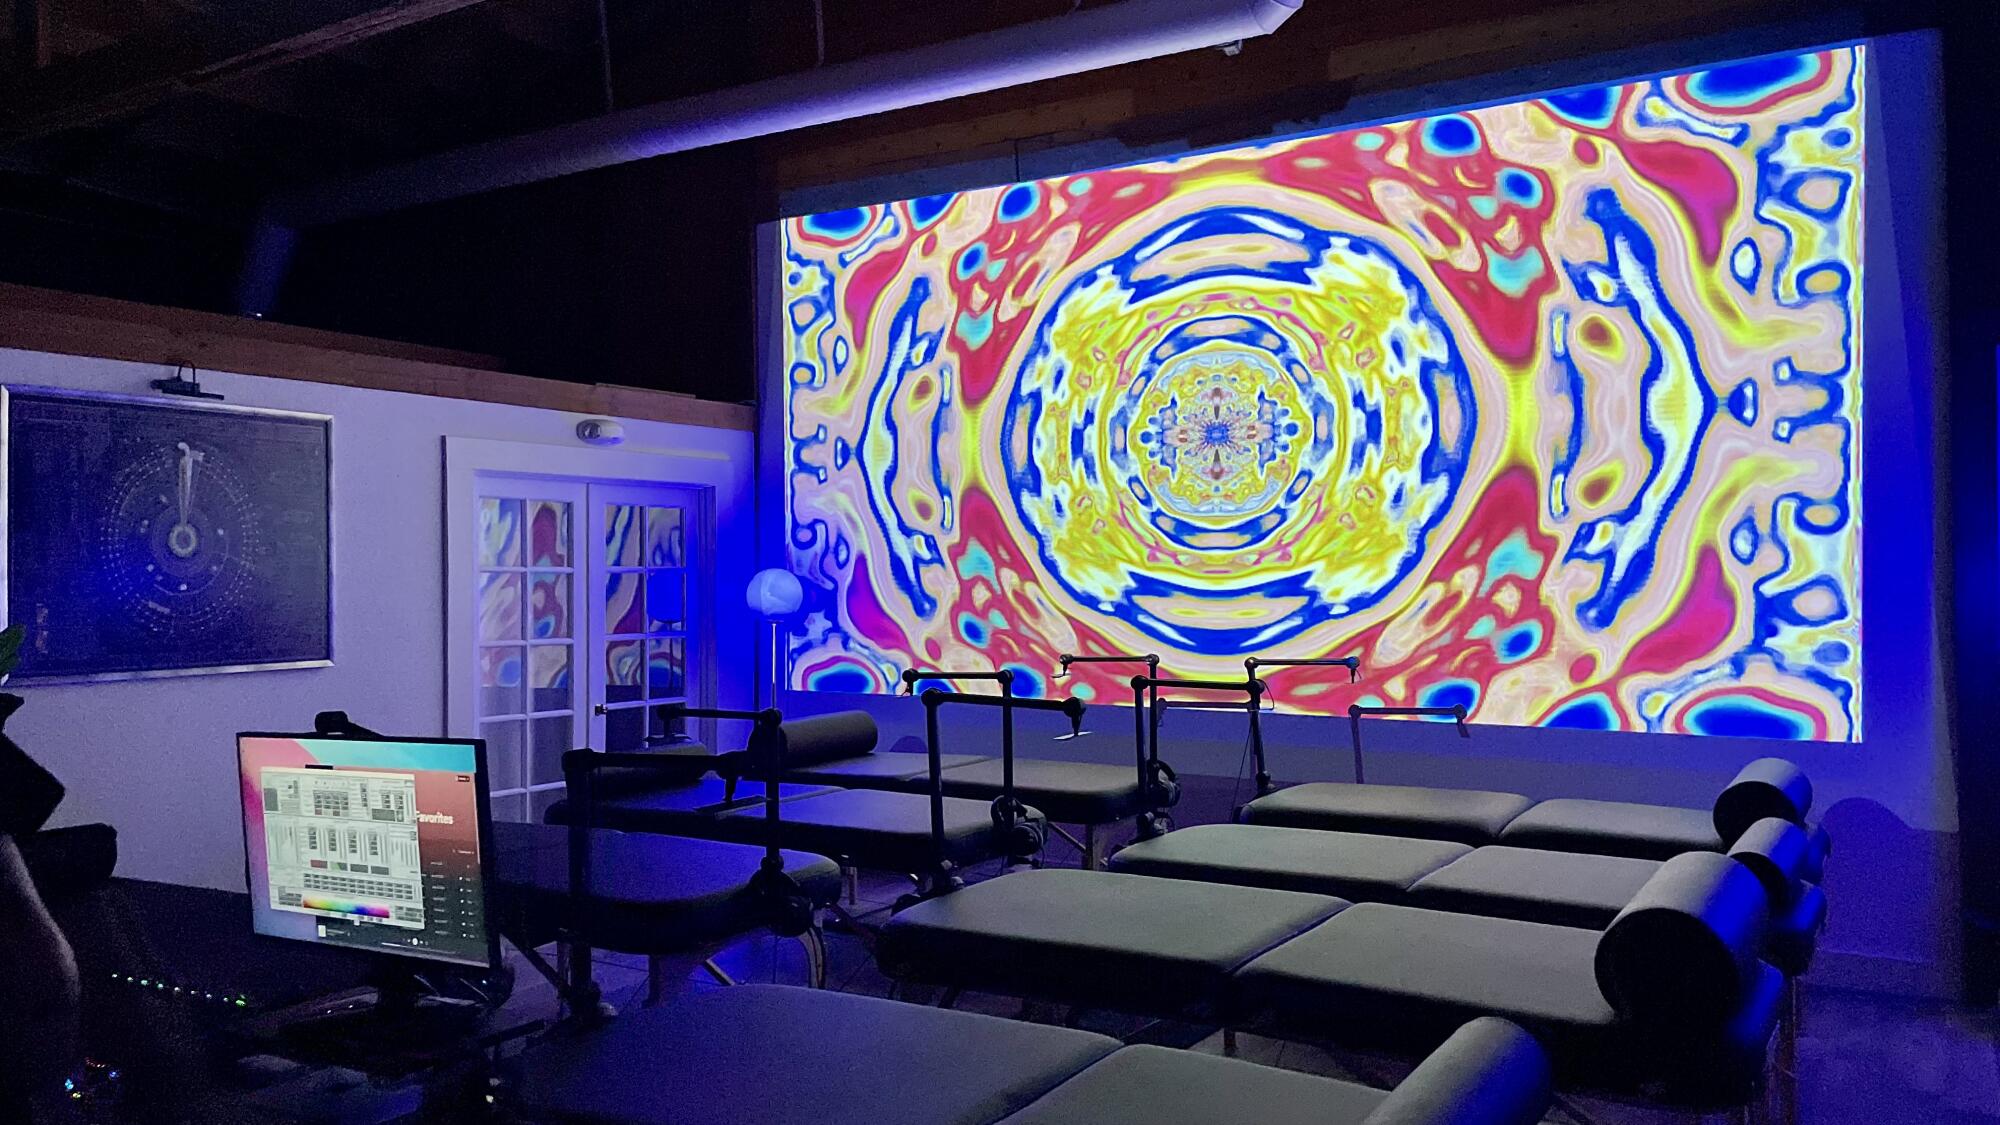 A dimly lit room with a cluster of massage tables in the center and trippy, abstract graphics on a big screen.